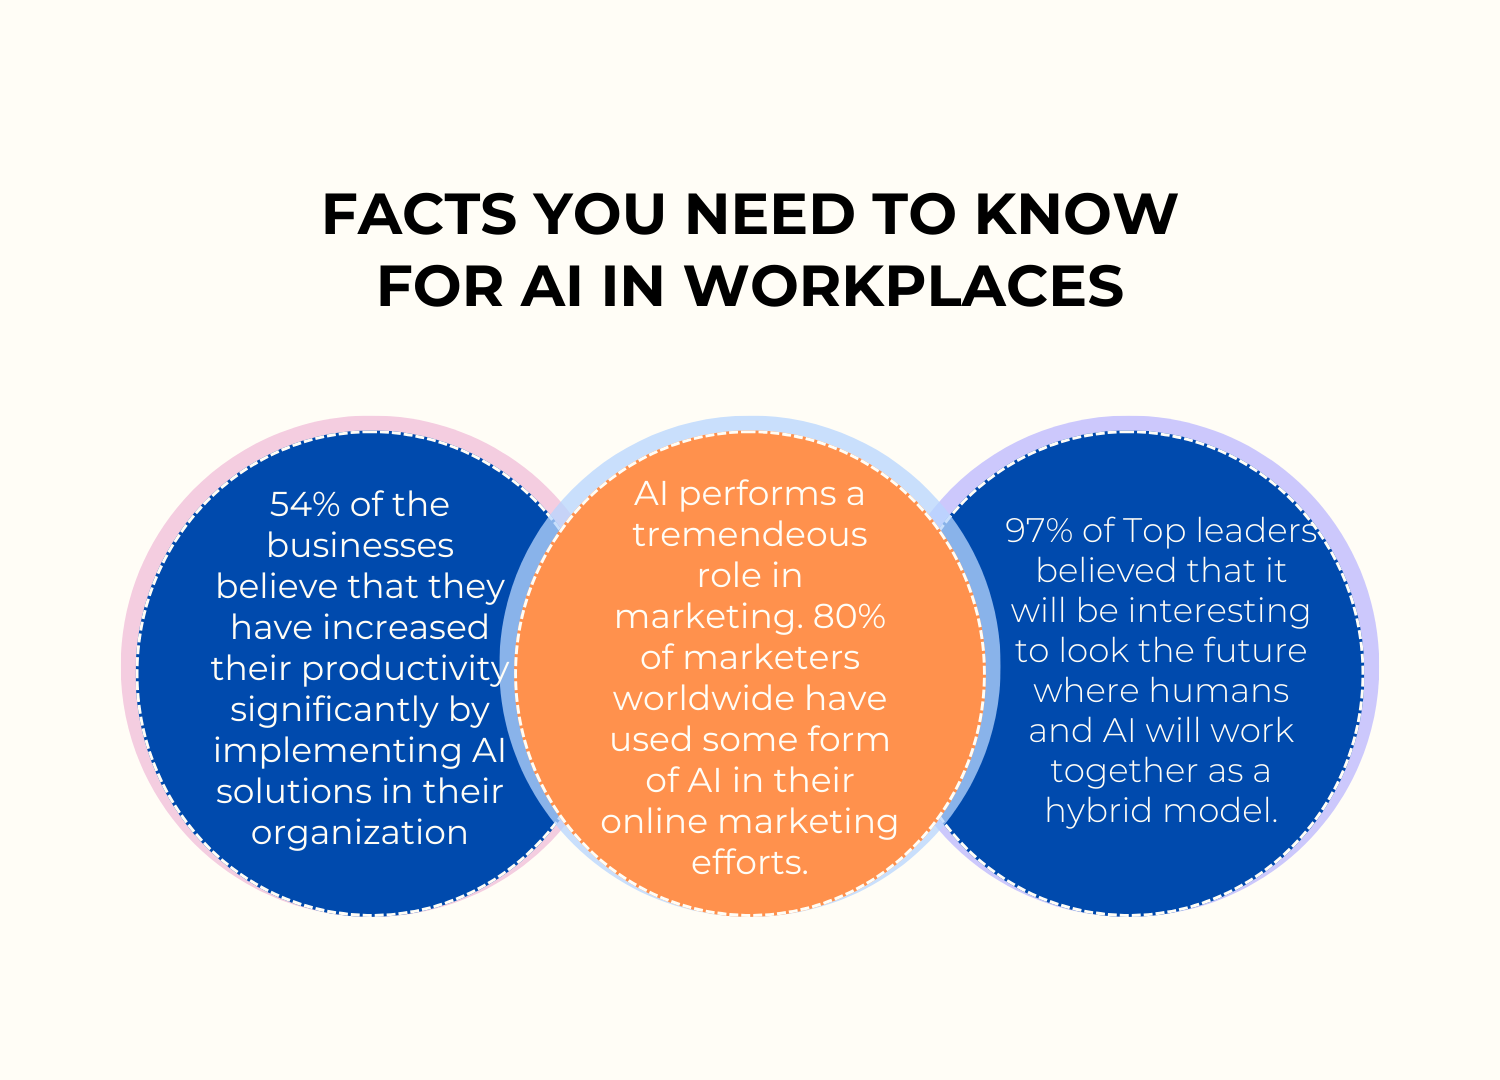 Facts for AI in workplace